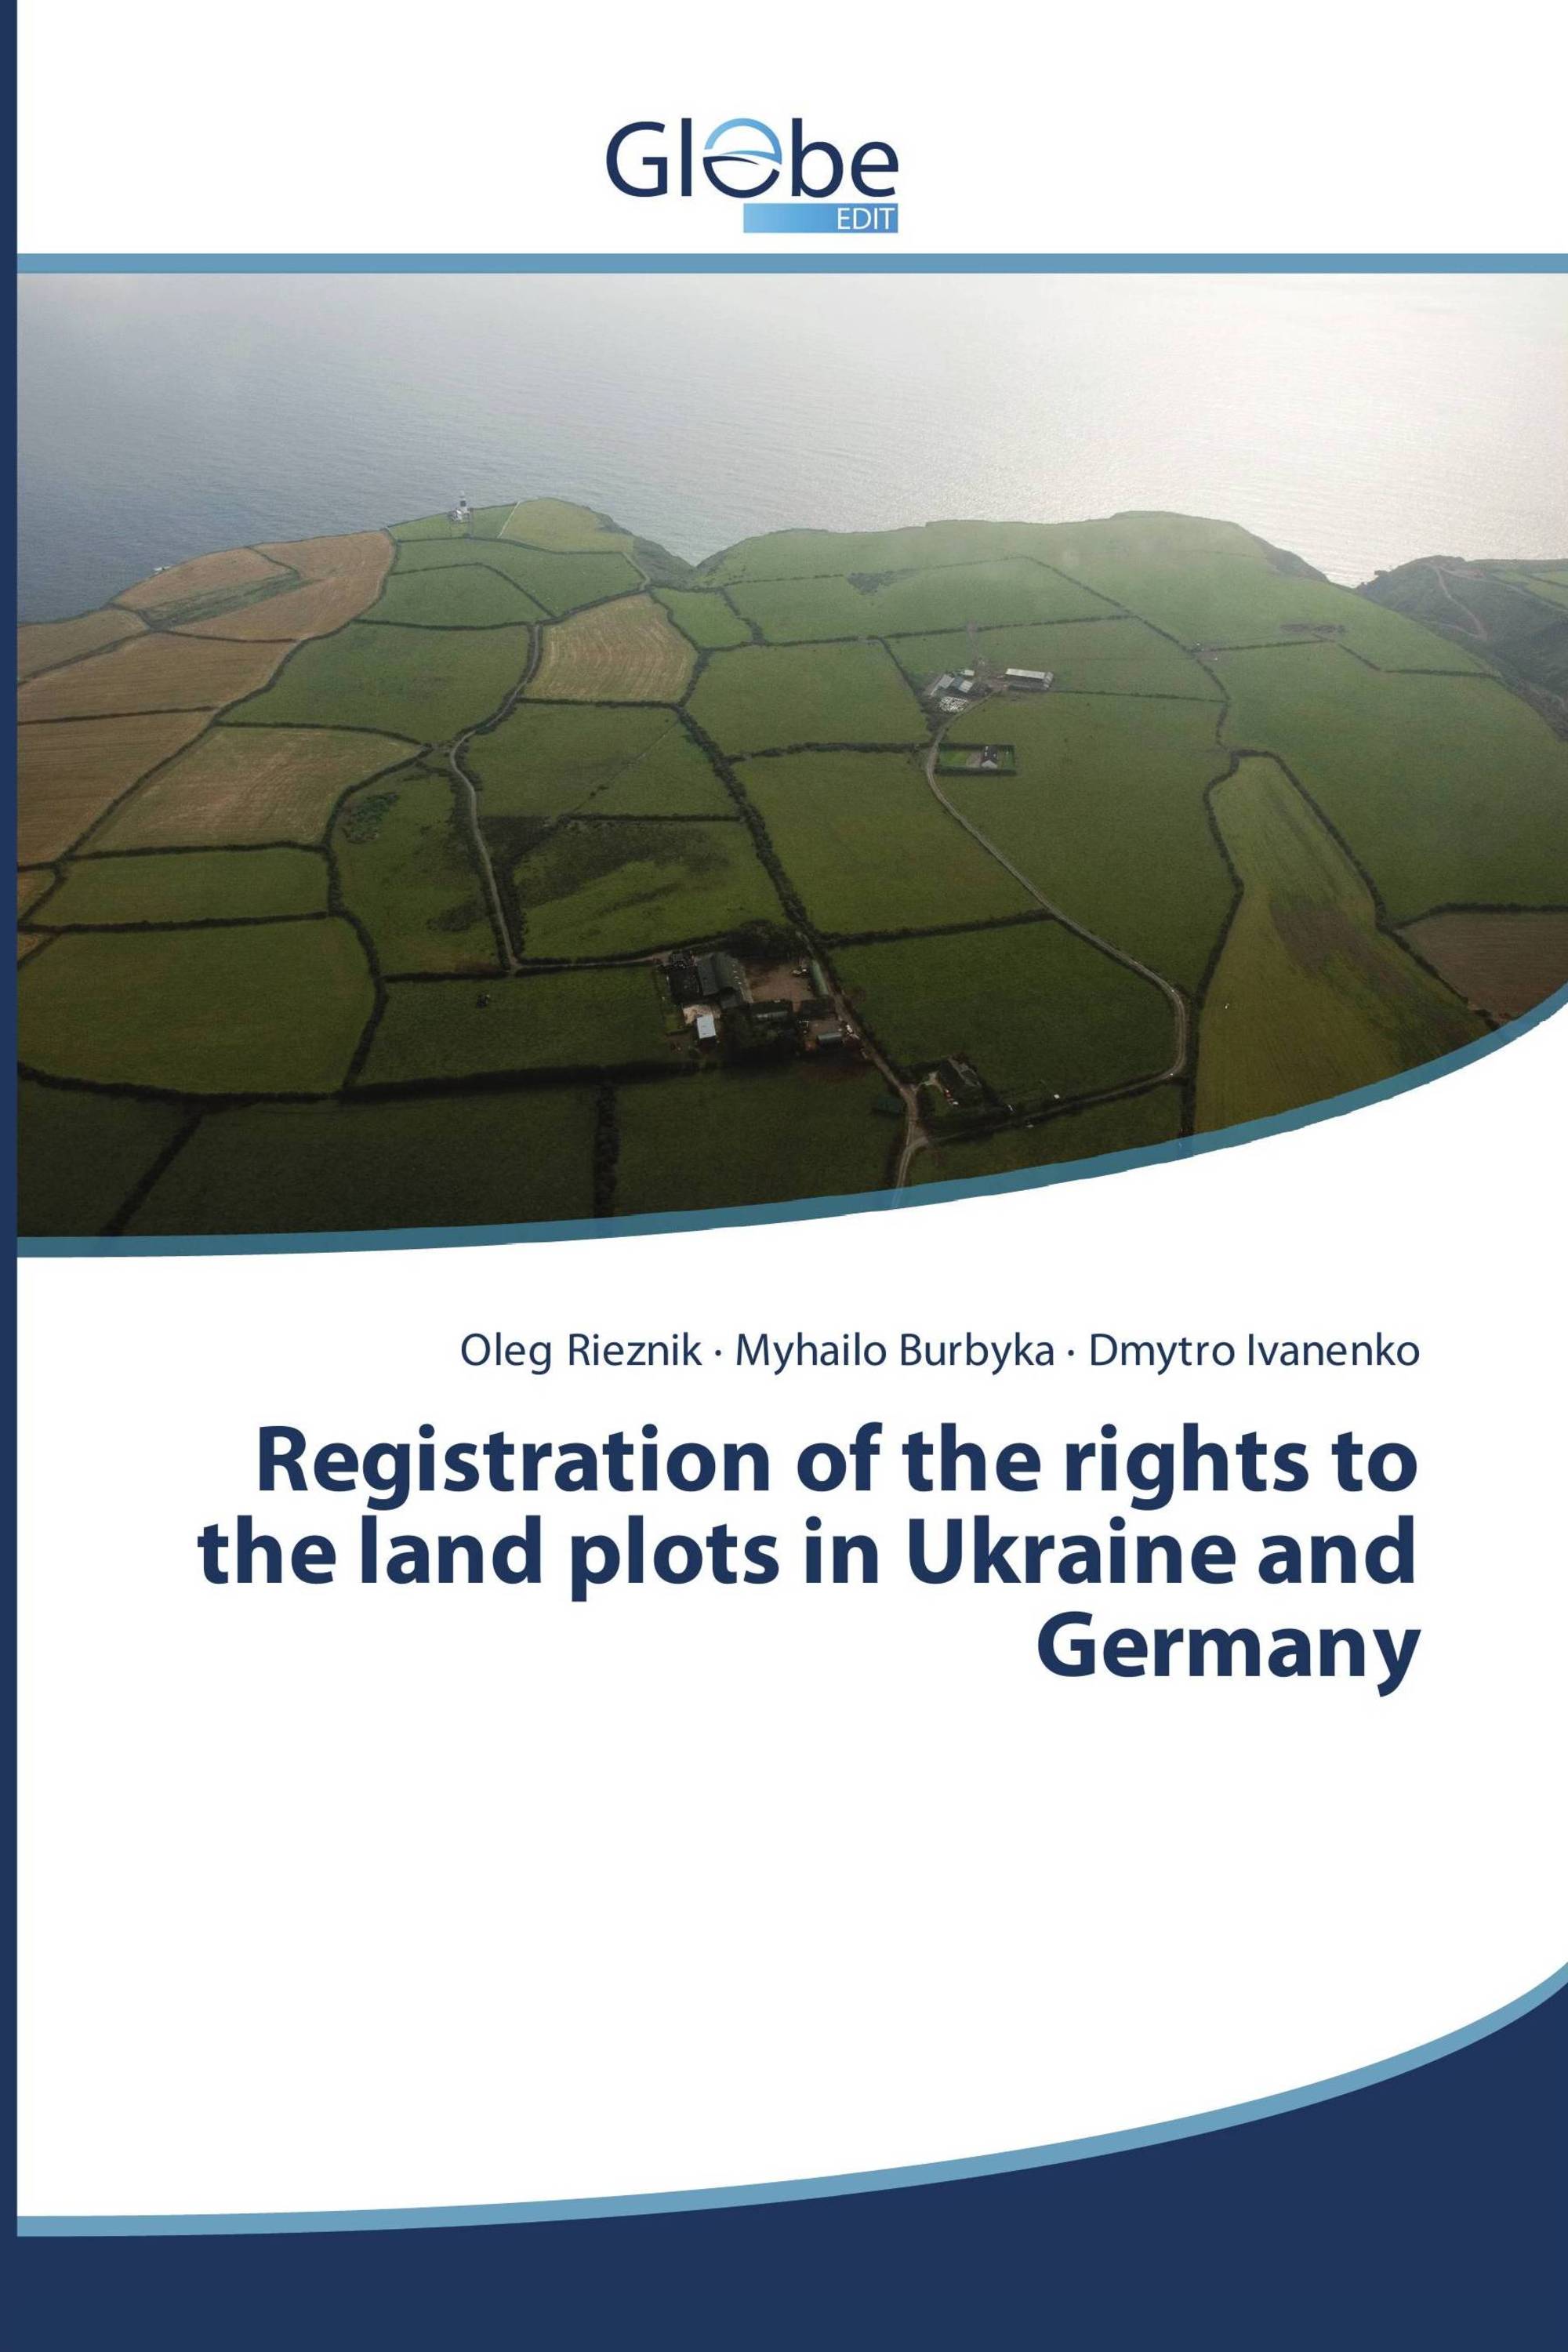 Registration of the rights to the land plots in Ukraine and Germany